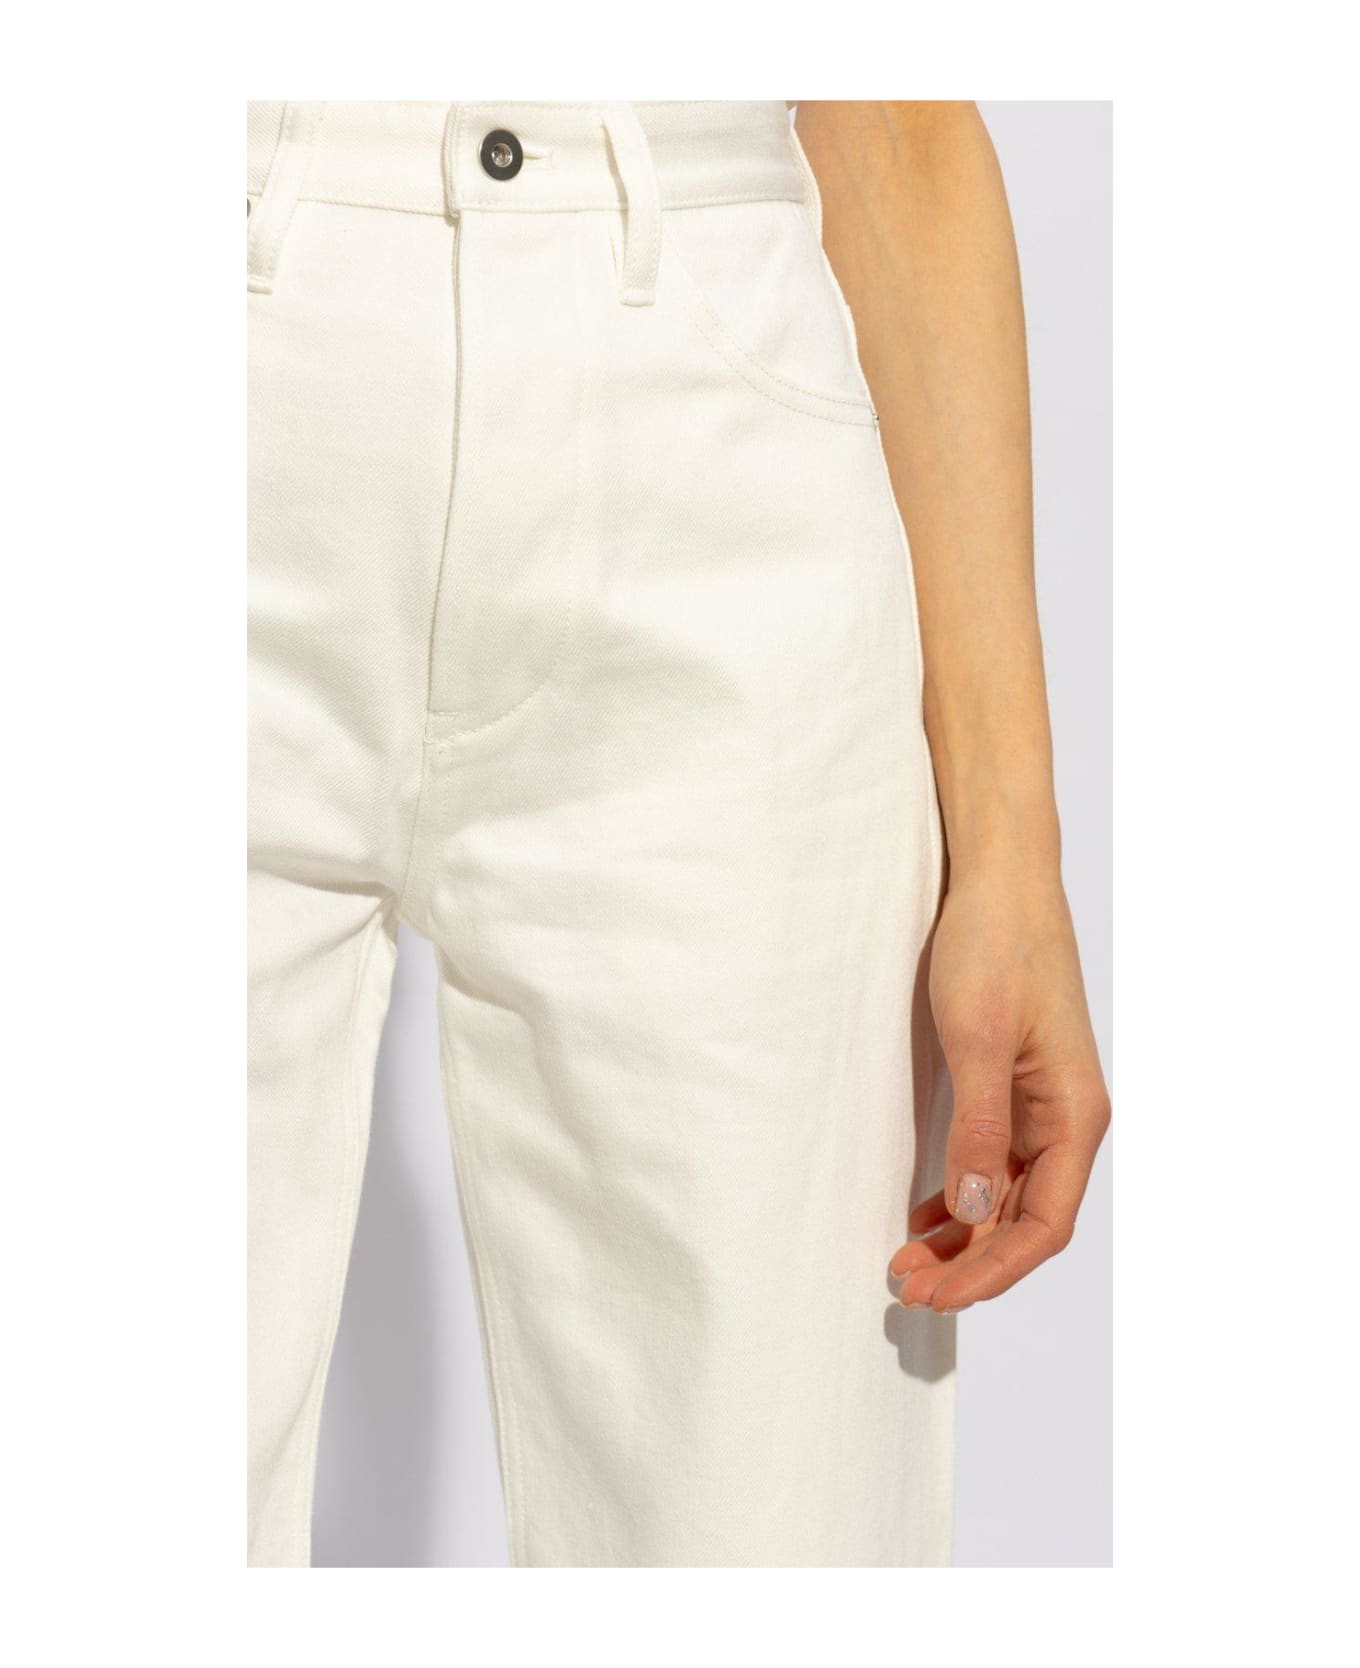 Jil Sander Mid-waisted Cropped Jeans - White